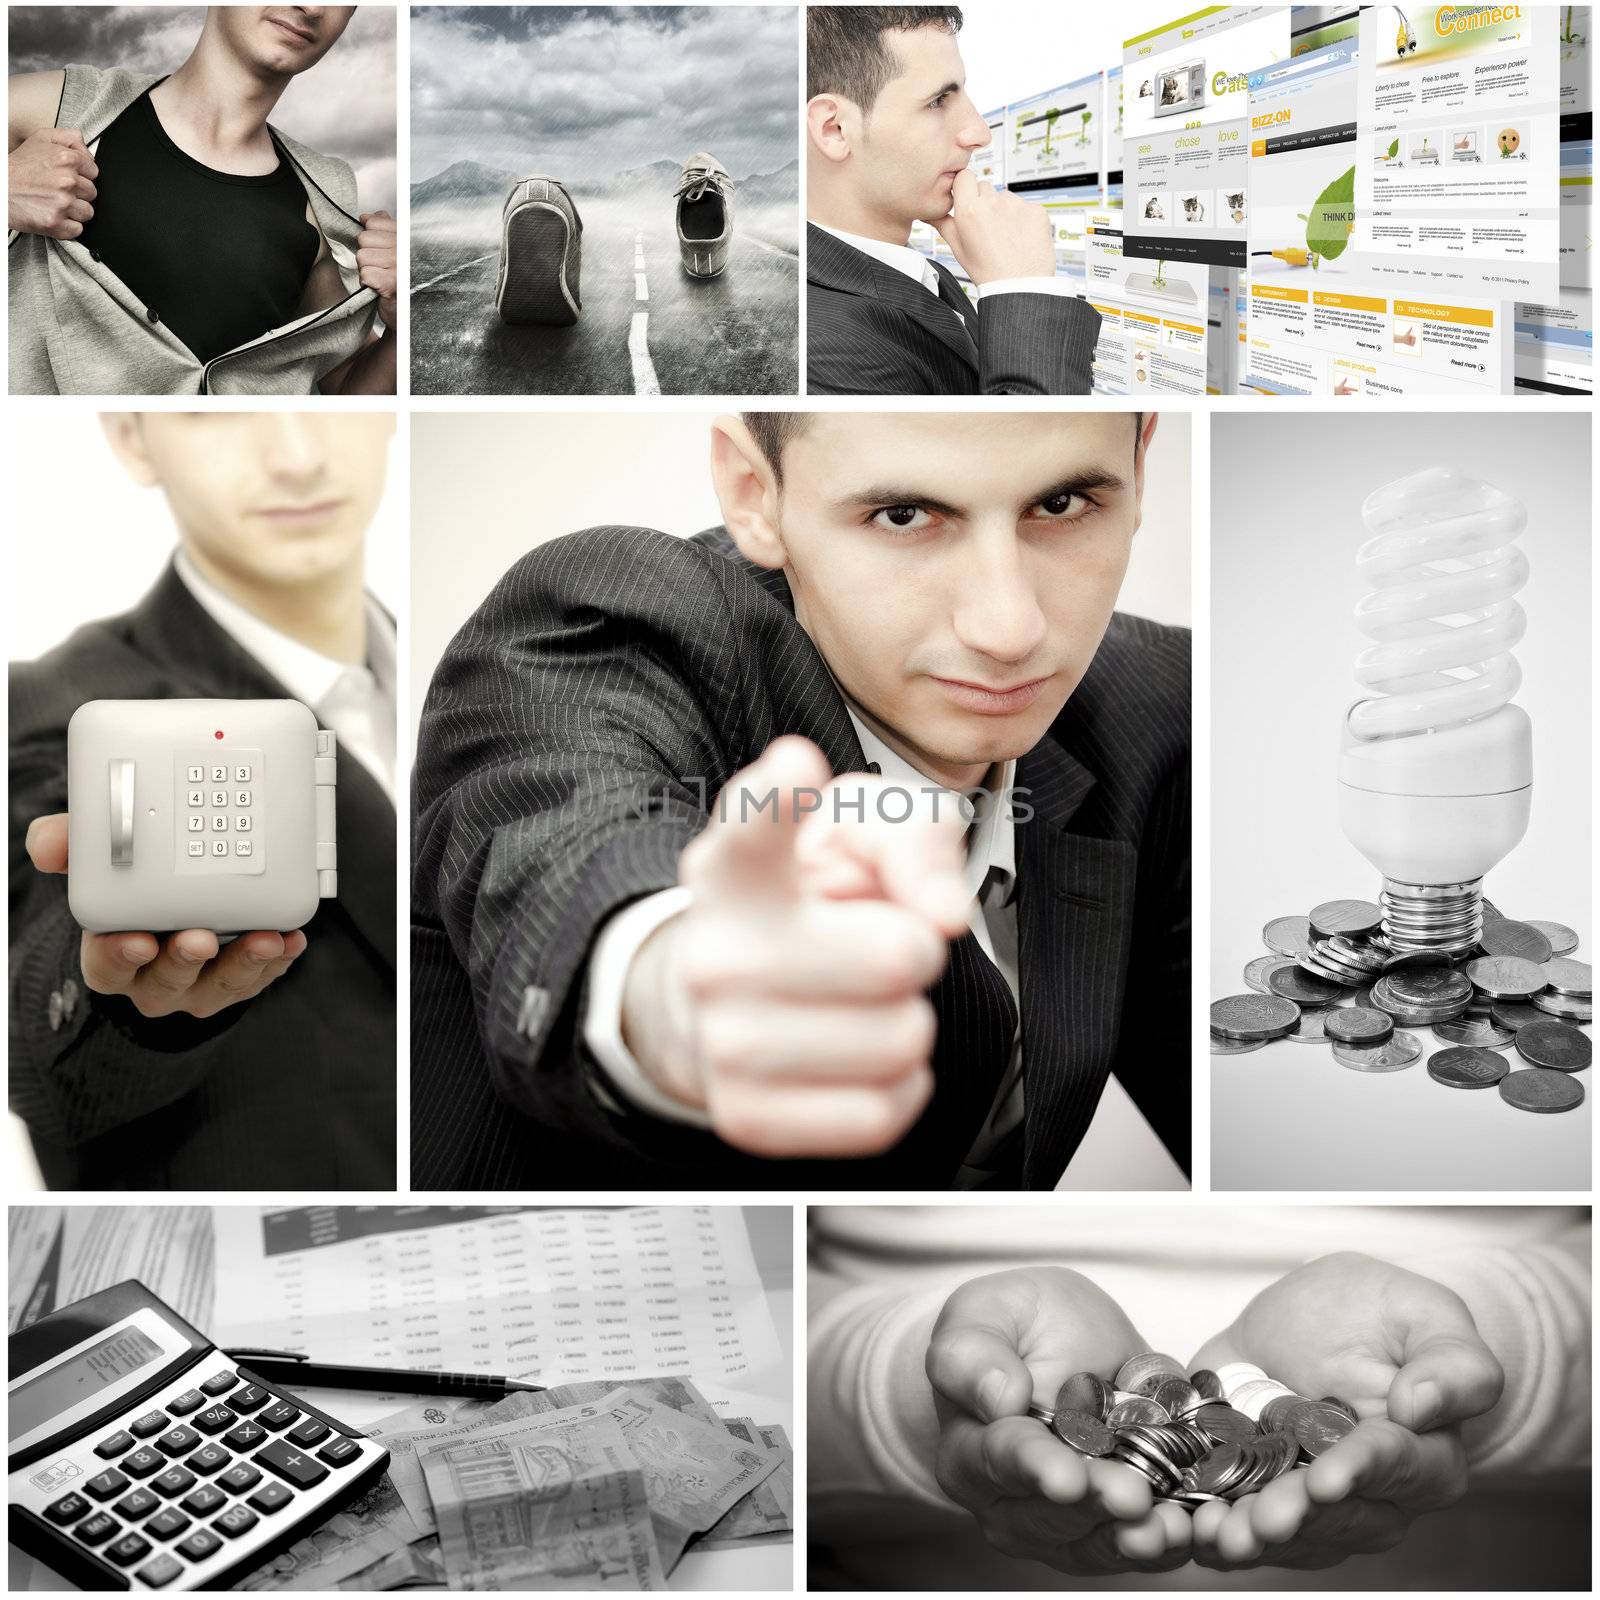 Business collage by silent47